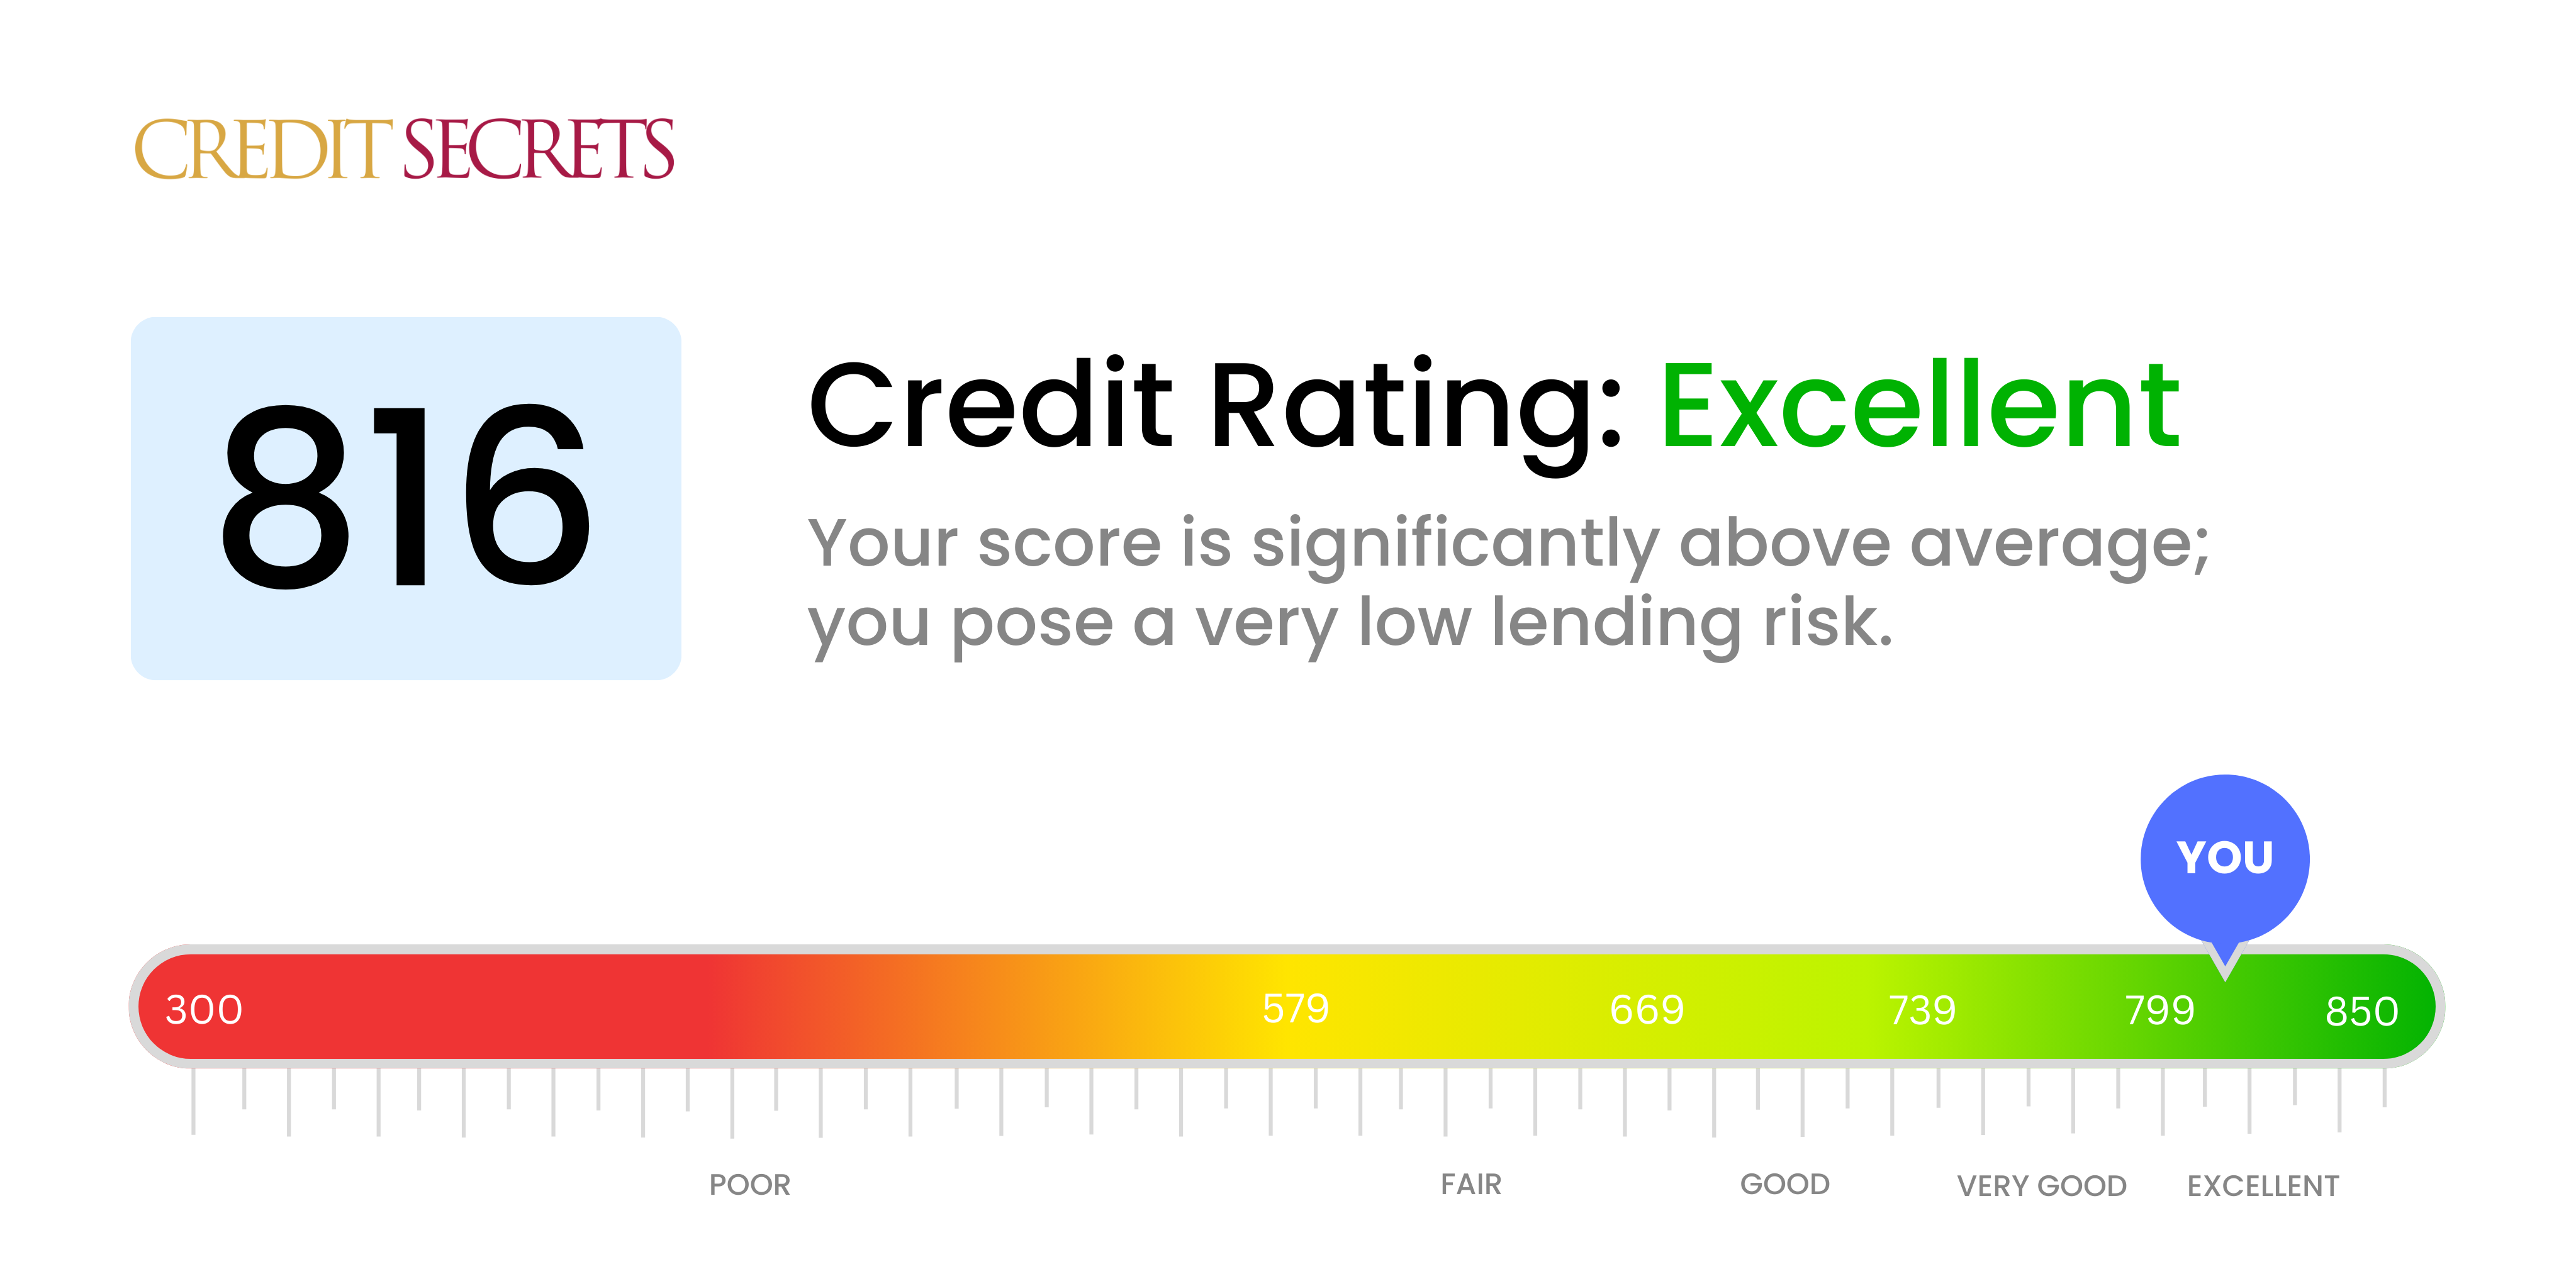 Is 816 a good credit score?